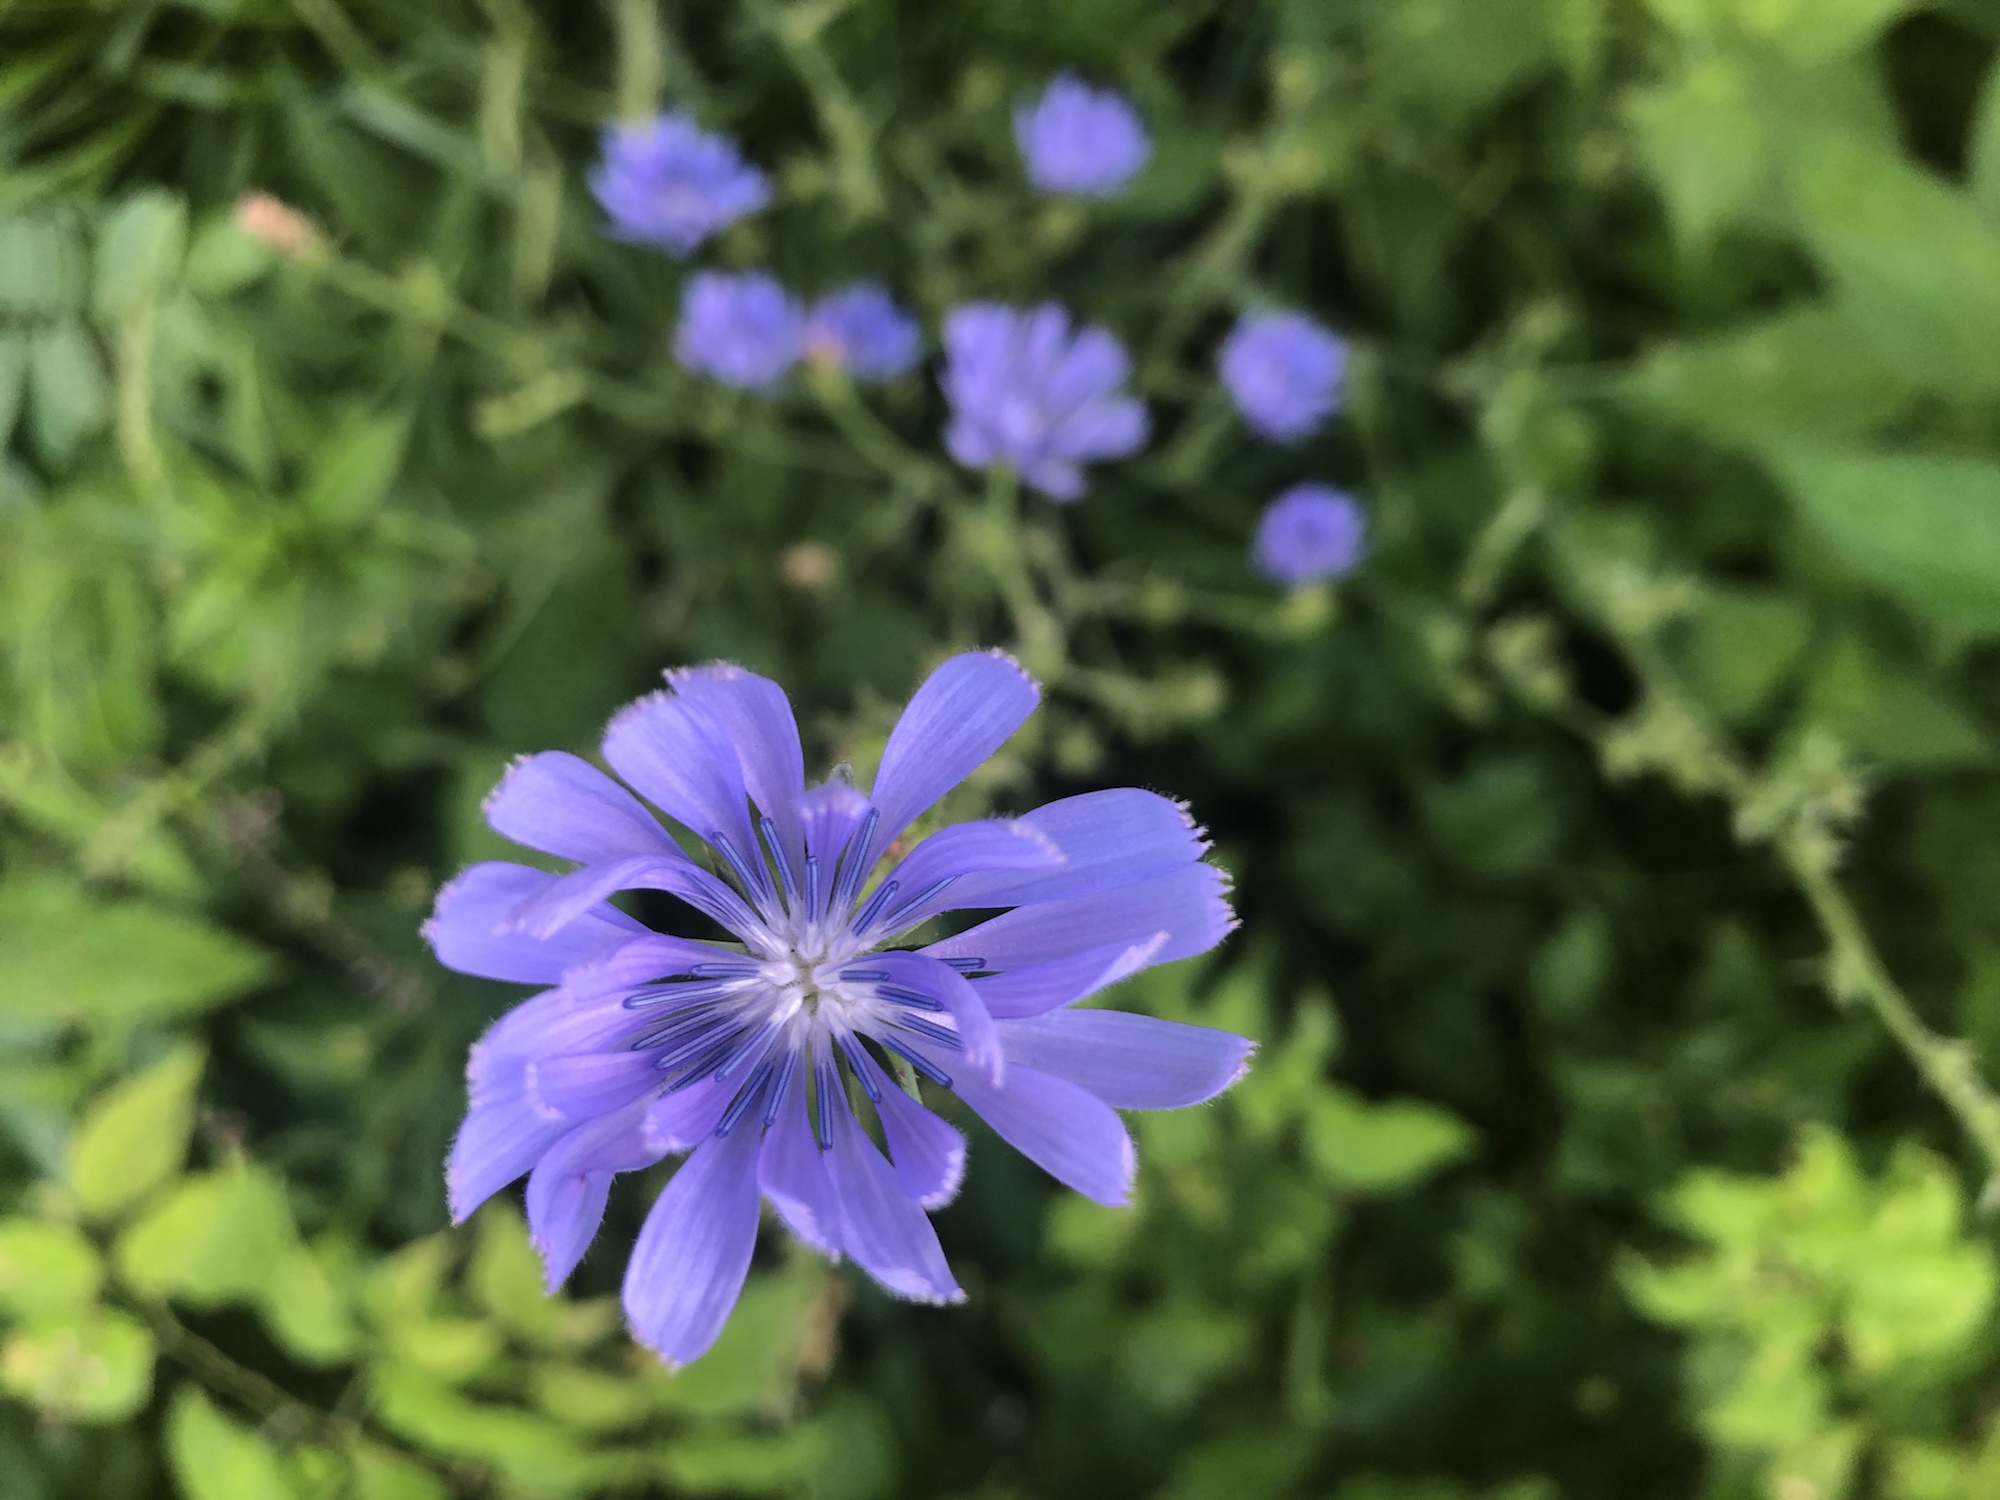 Chicory in Marion Dunn Prairie in Madison, Wisconsin on July 12, 2019.